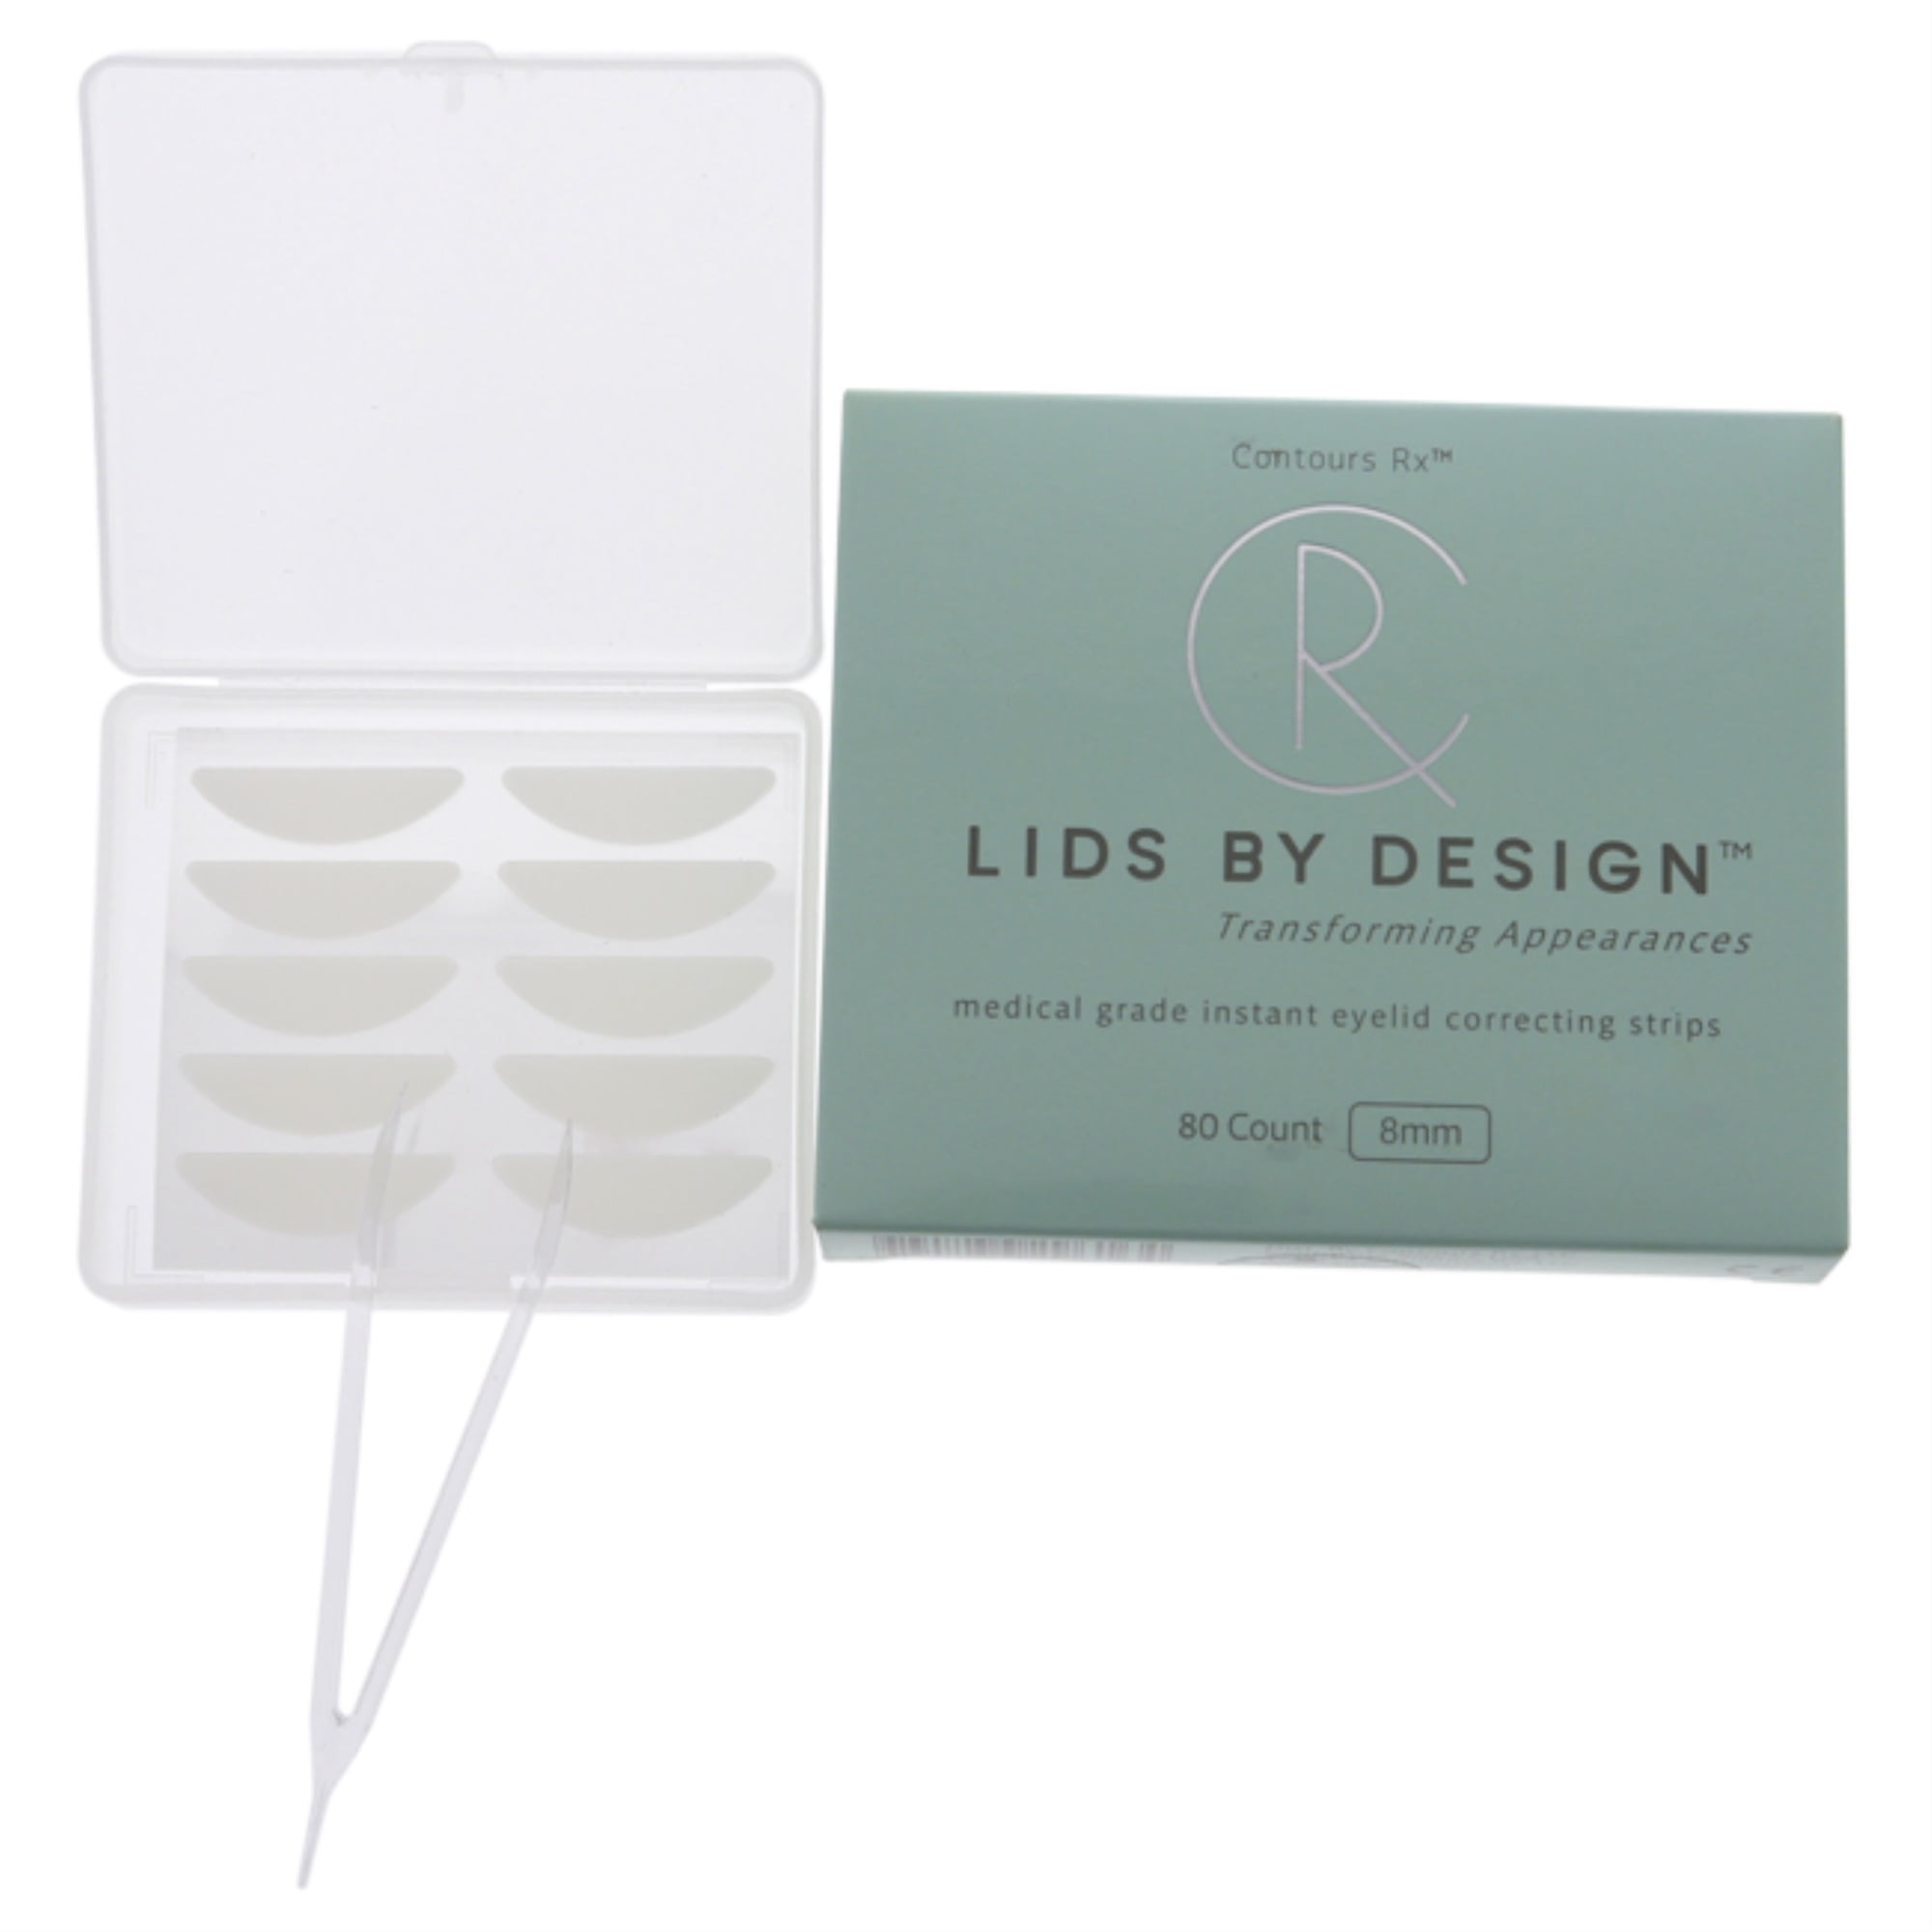 Beauty - Skin Care - Eye Care - Contours Rx Lids By Design - 7mm - Online  Shopping for Canadians